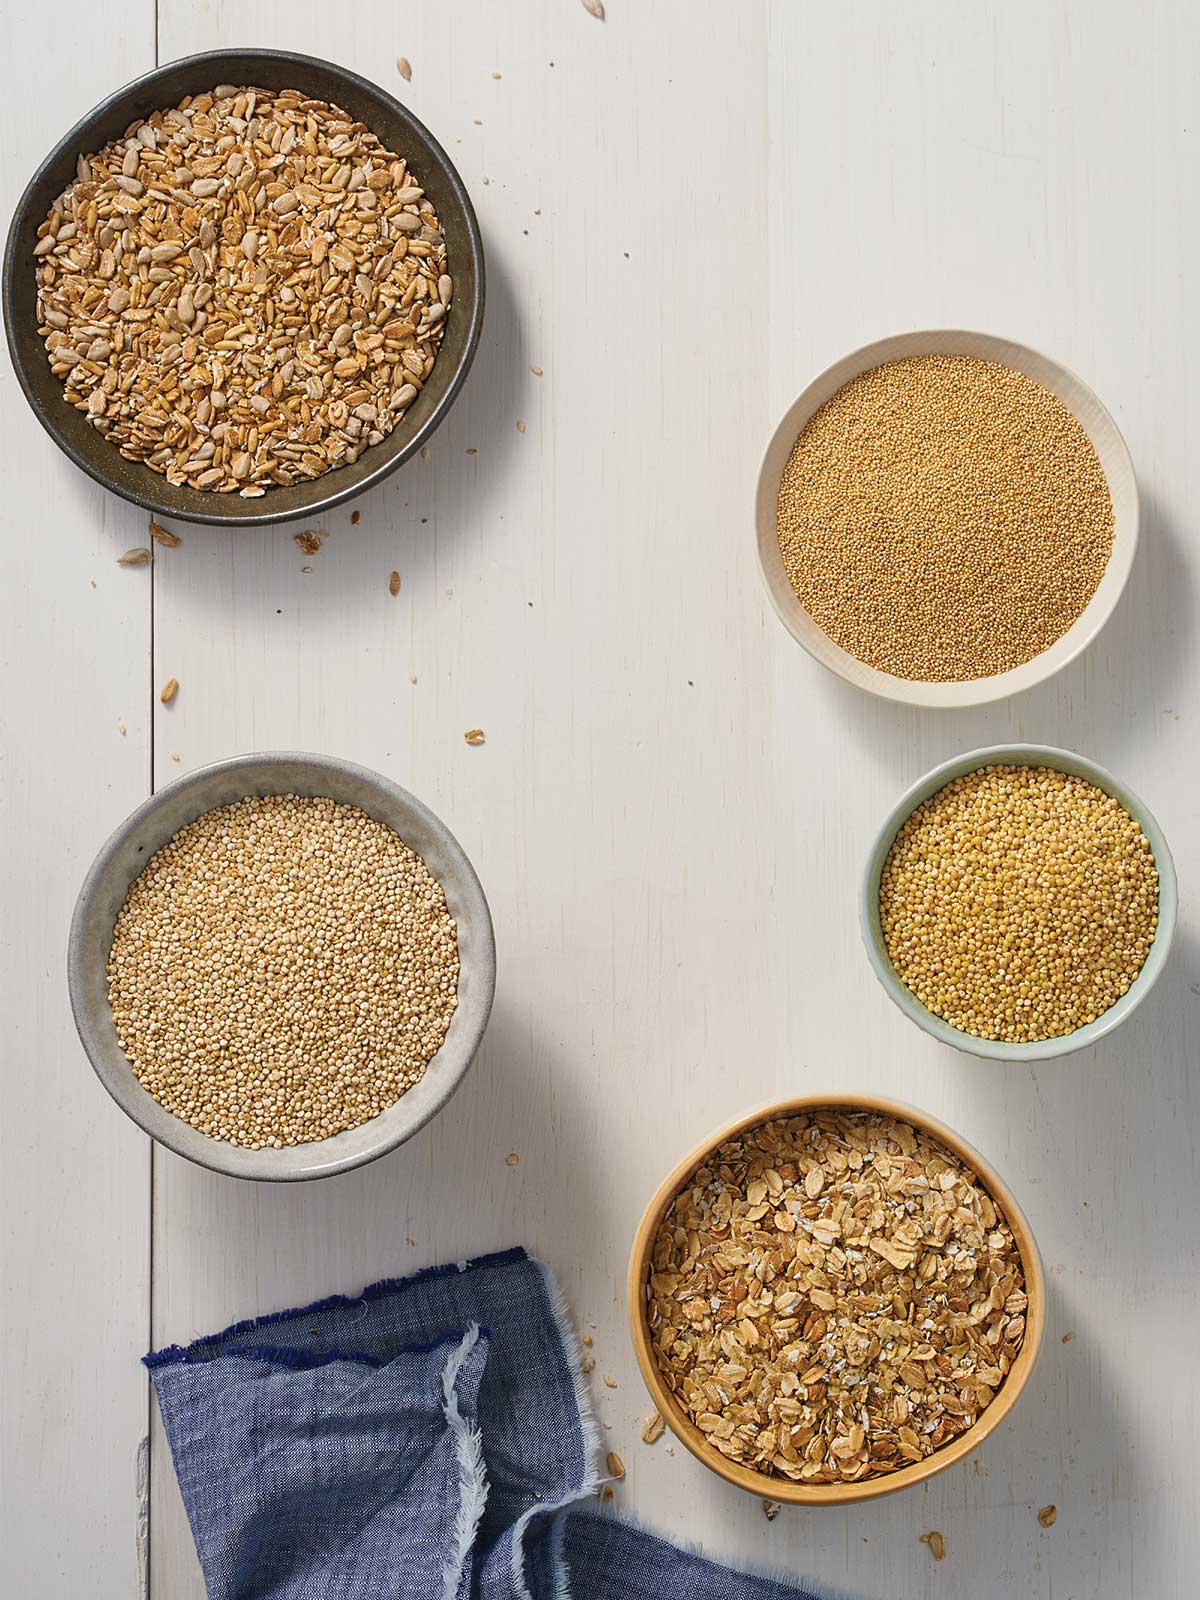 Bowls with different grains from Harvest Grains Blend